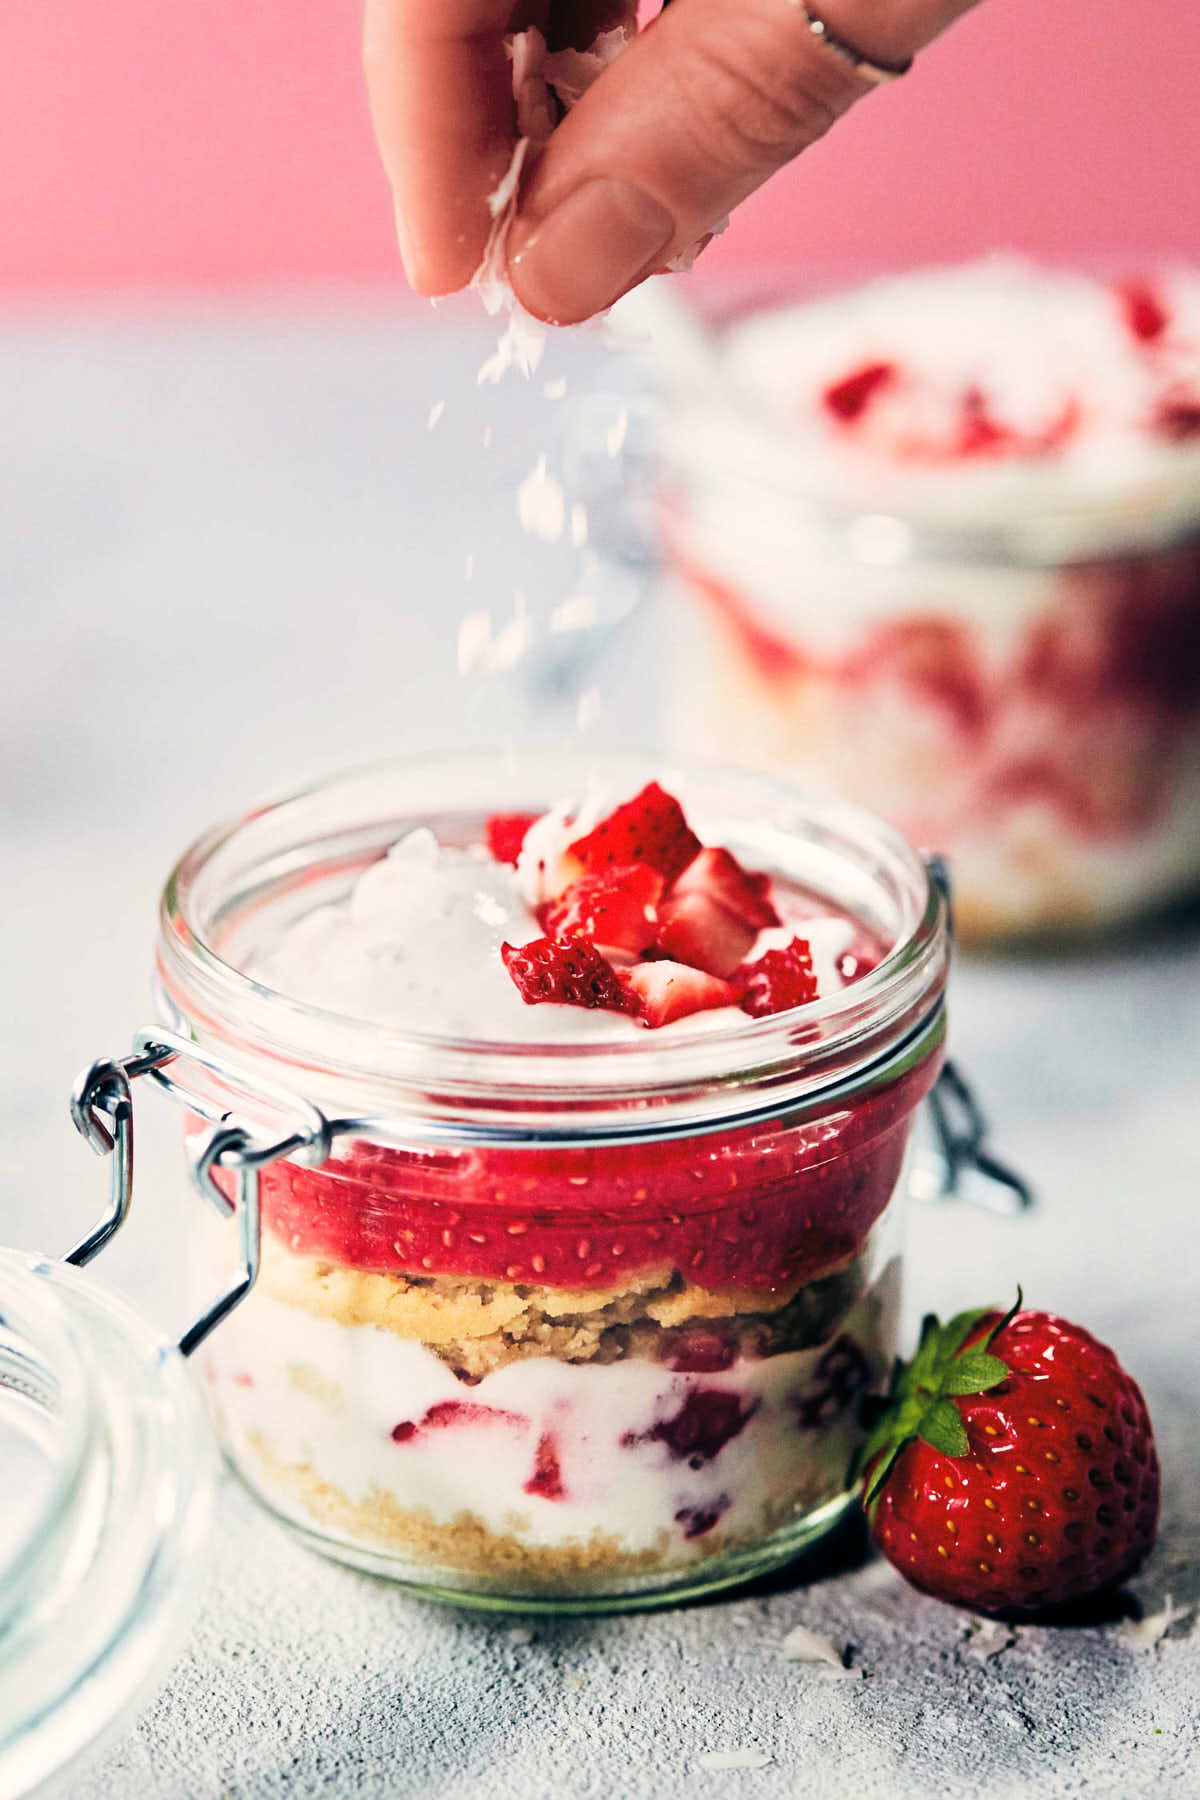 Strawberry shortcake trifle being topped with coconut flakes